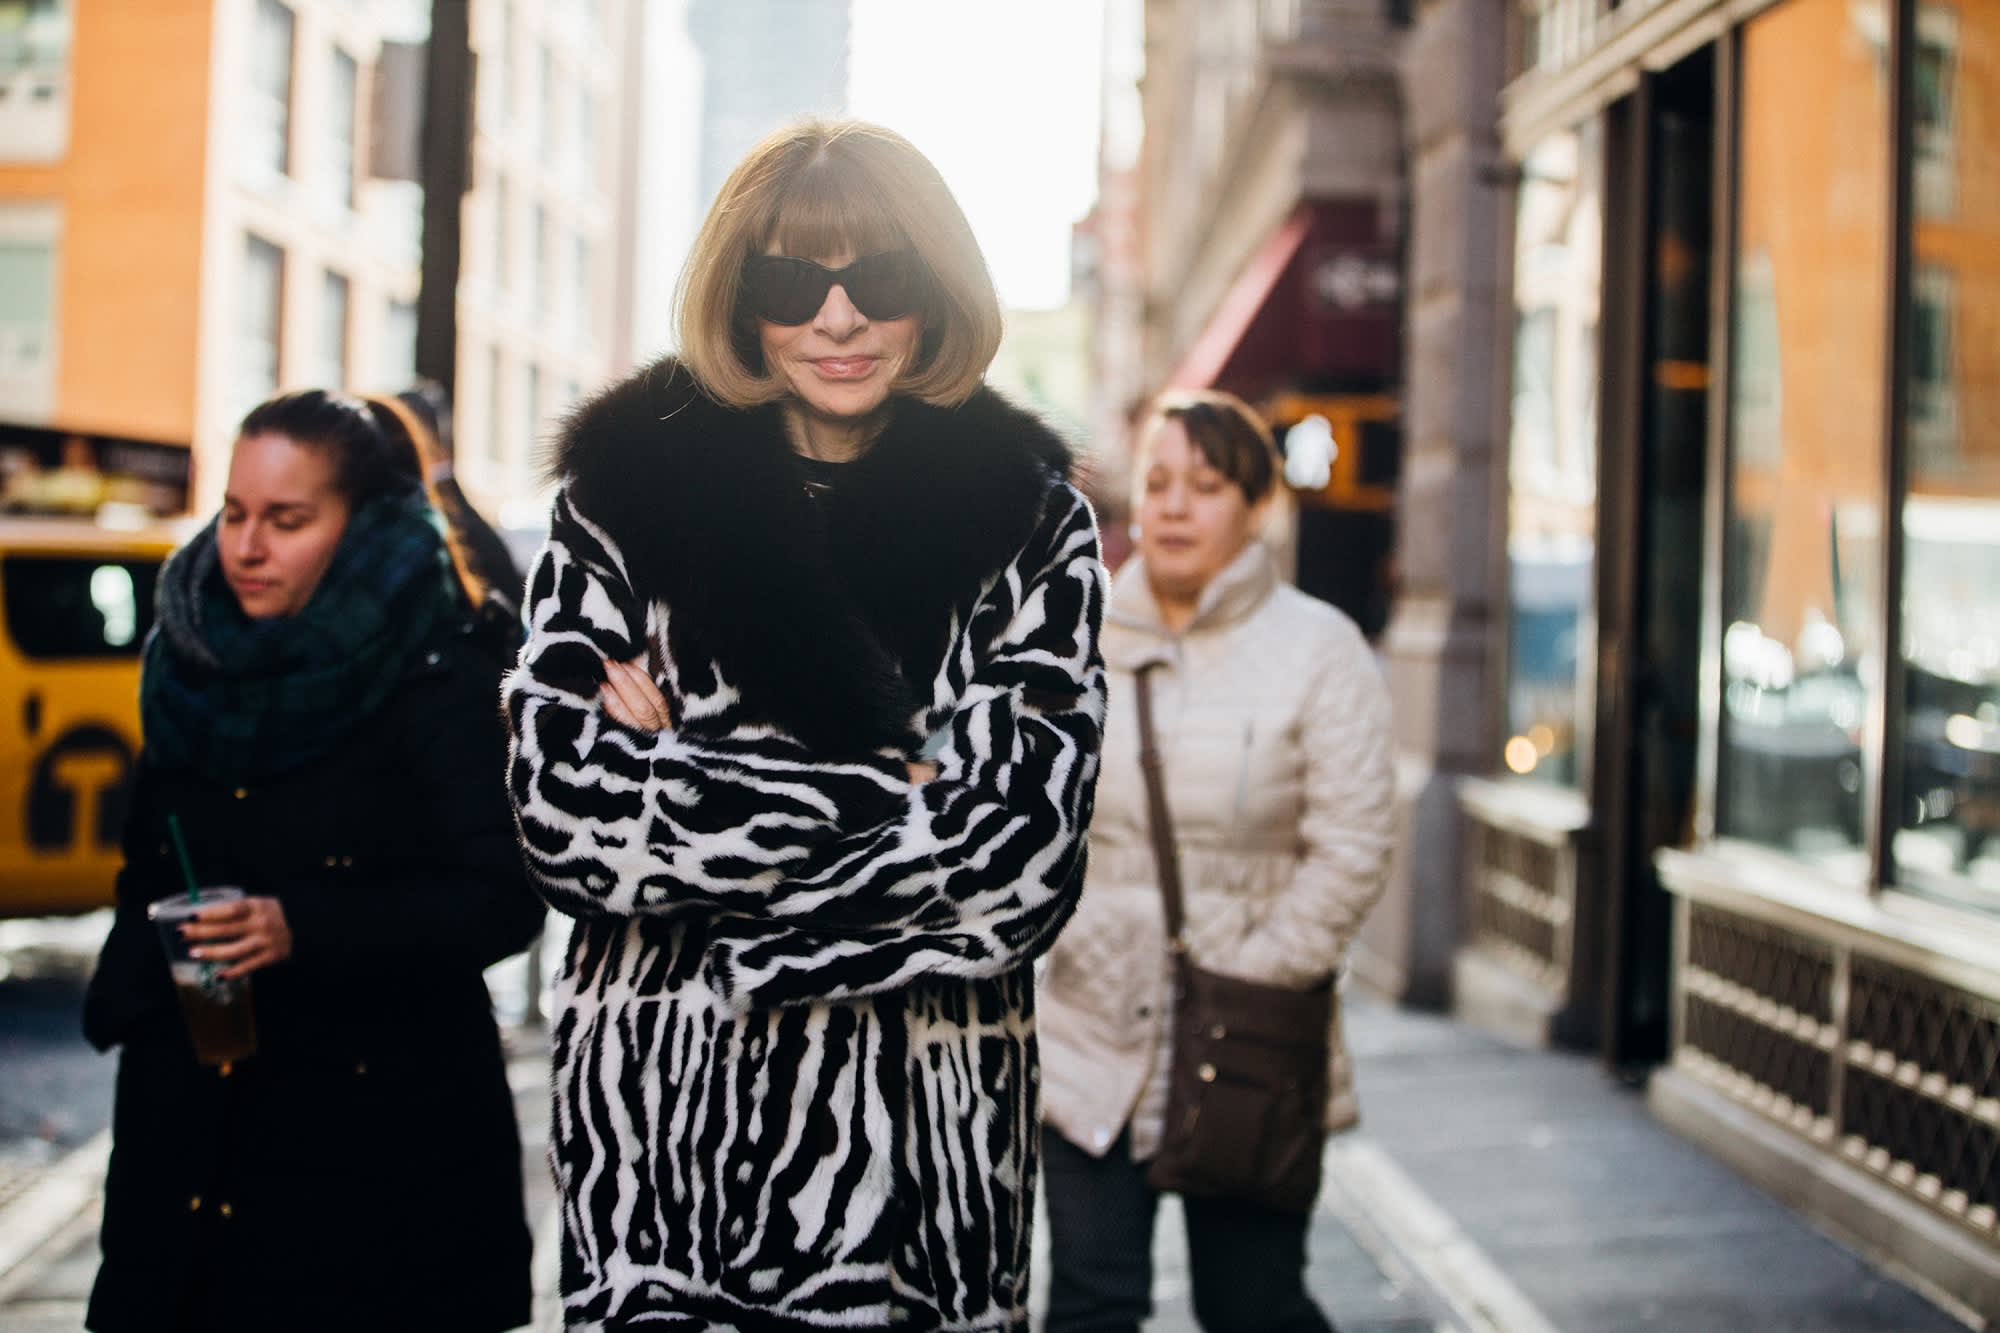 Anna Wintour says this is how you should dress for a job interview